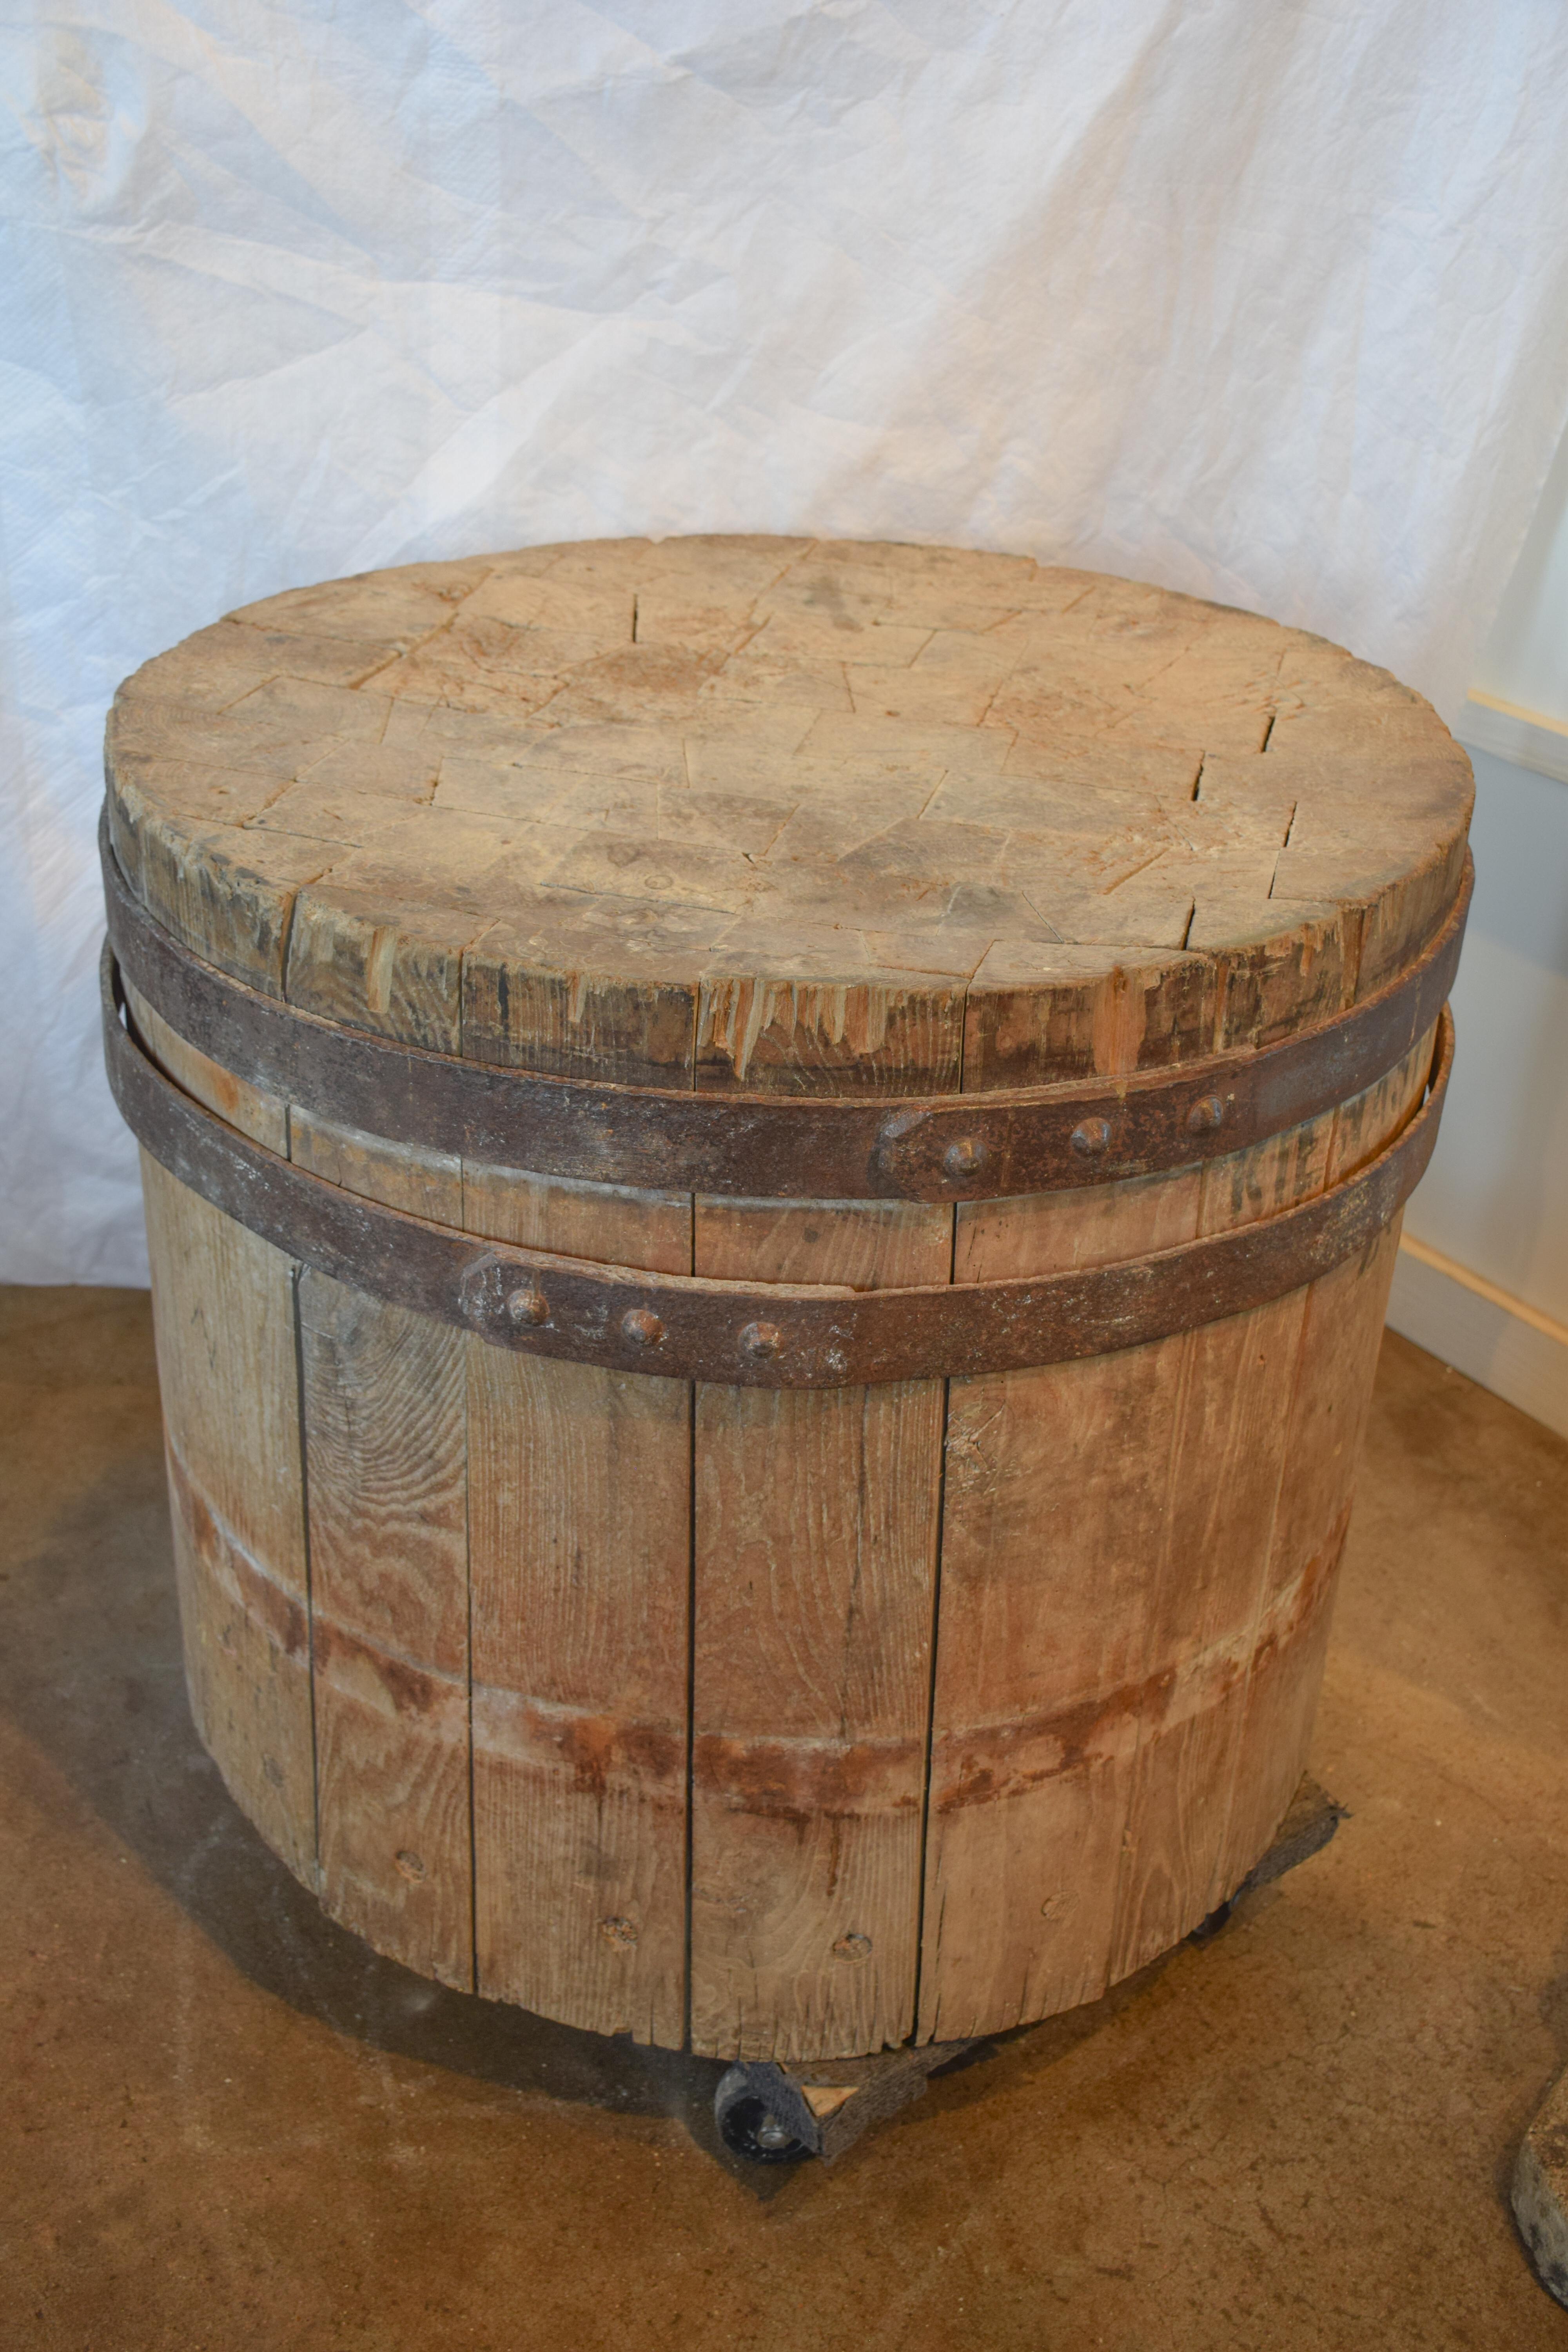 Perfection is the best adjective to describe this one of a kind Large Round Butcher block. Imagine the meals that originated from this piece of art. Adorned with two forged Iron bands and stamped with 